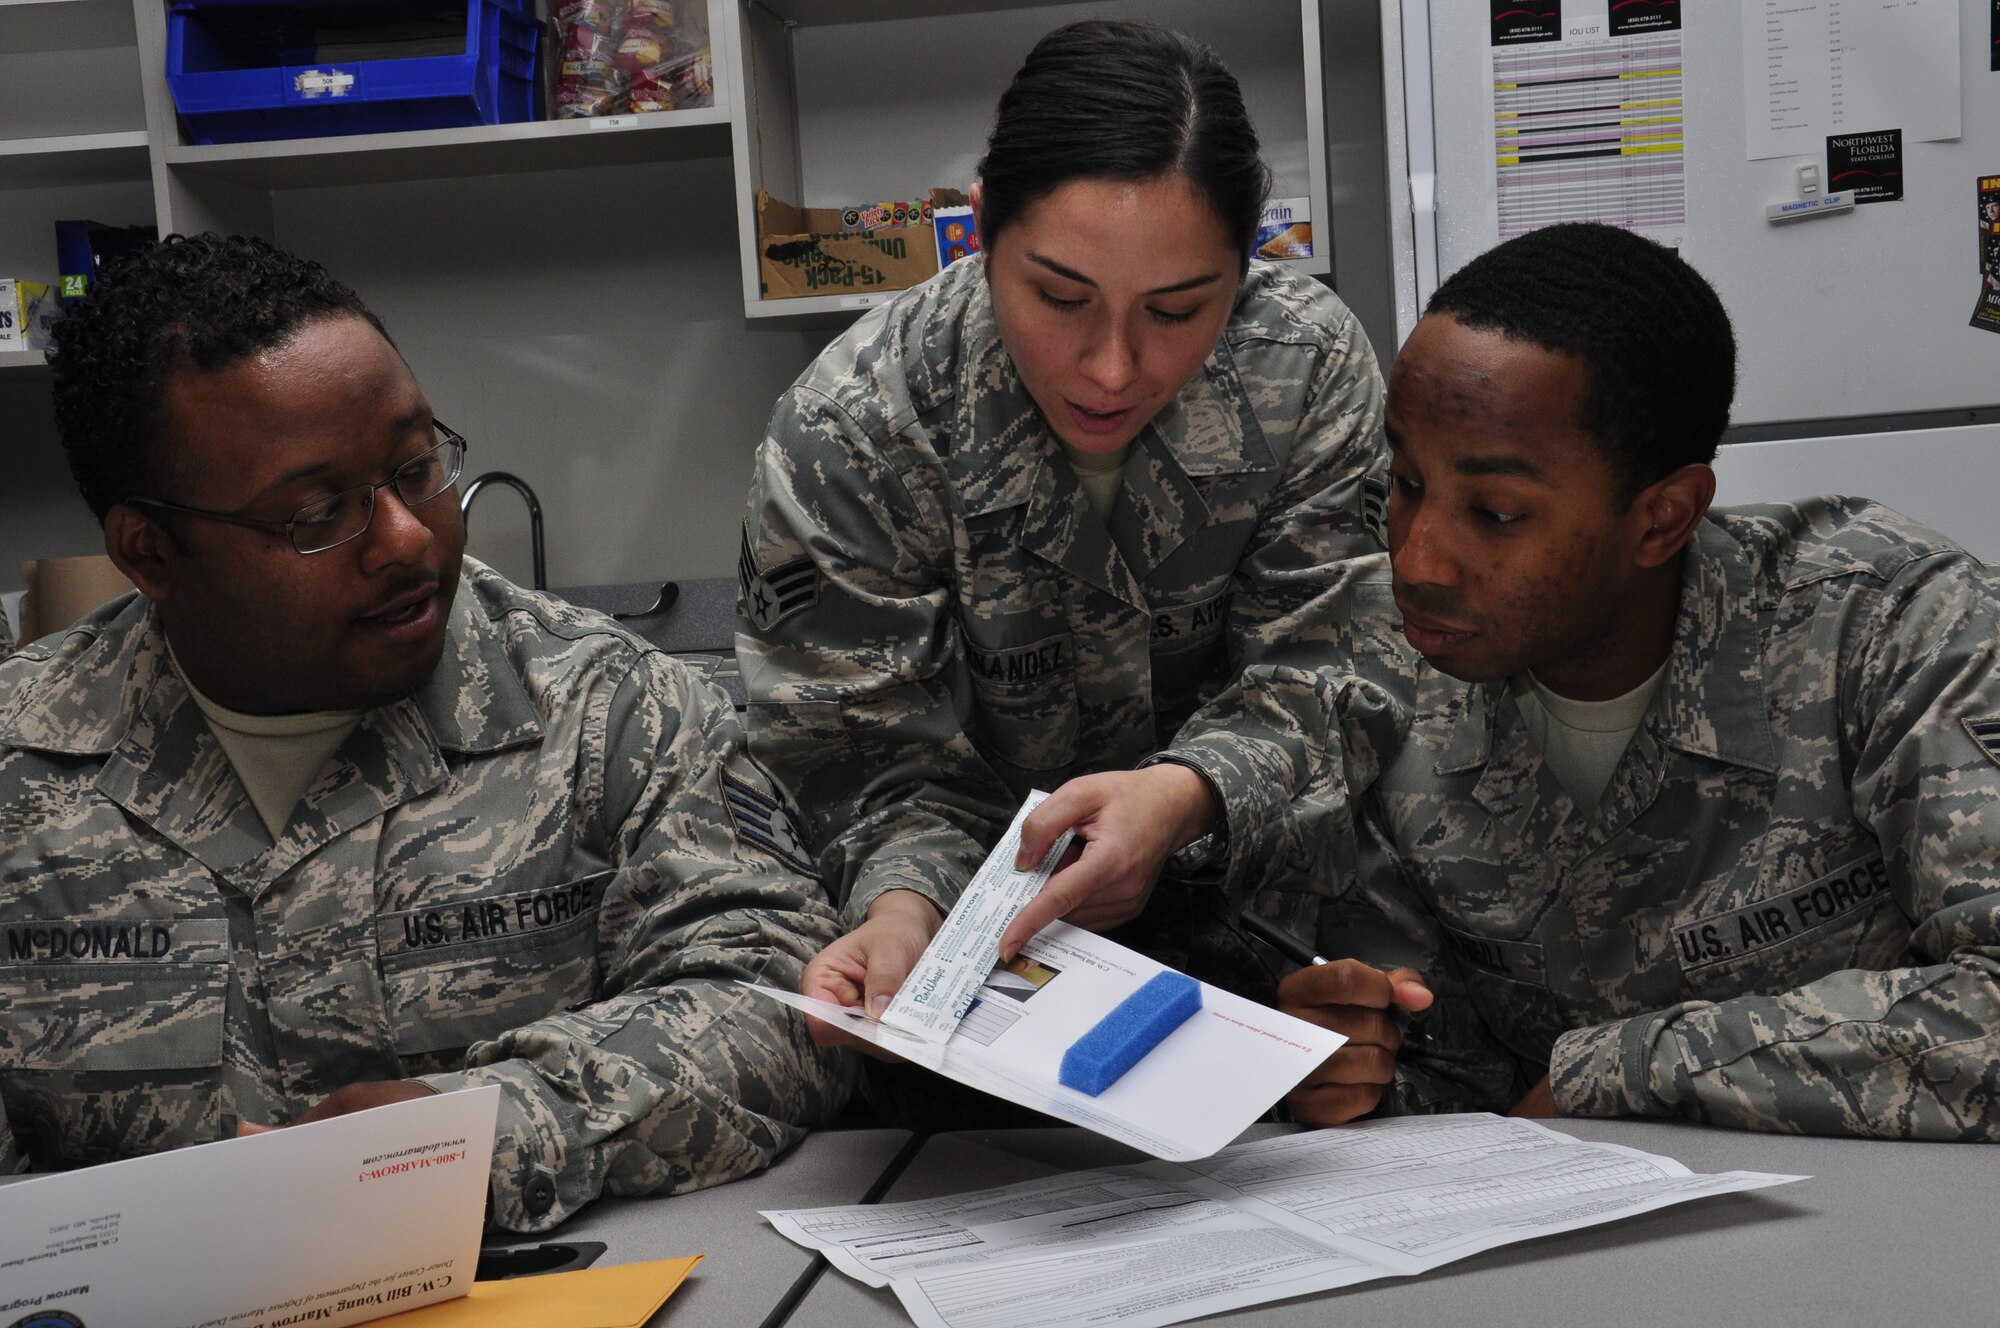 Senior Airman Eguzki Fernandez (center) instructs Staff Sgt. Anthony McDonald  and Senior Airman Kenneth McNeill, on how to fill out registration forms during a week-long bone marrow drive, Hurlburt Field, Fla., March 30, 2011. All are from the 1st Special Operations Communications Squadron Tactical Communications Flight. The base-wide drive, initiated by the 1st SOCS, helps support their colleague, Senior Master Sgt. Andy Turnbull, Tactical Communications Flight superintendent, who was diagnosed with acute myeloid leukemia July 19, 2010. (U.S. Air Force photo by Staff Sgt. William Banton/RELEASED) 